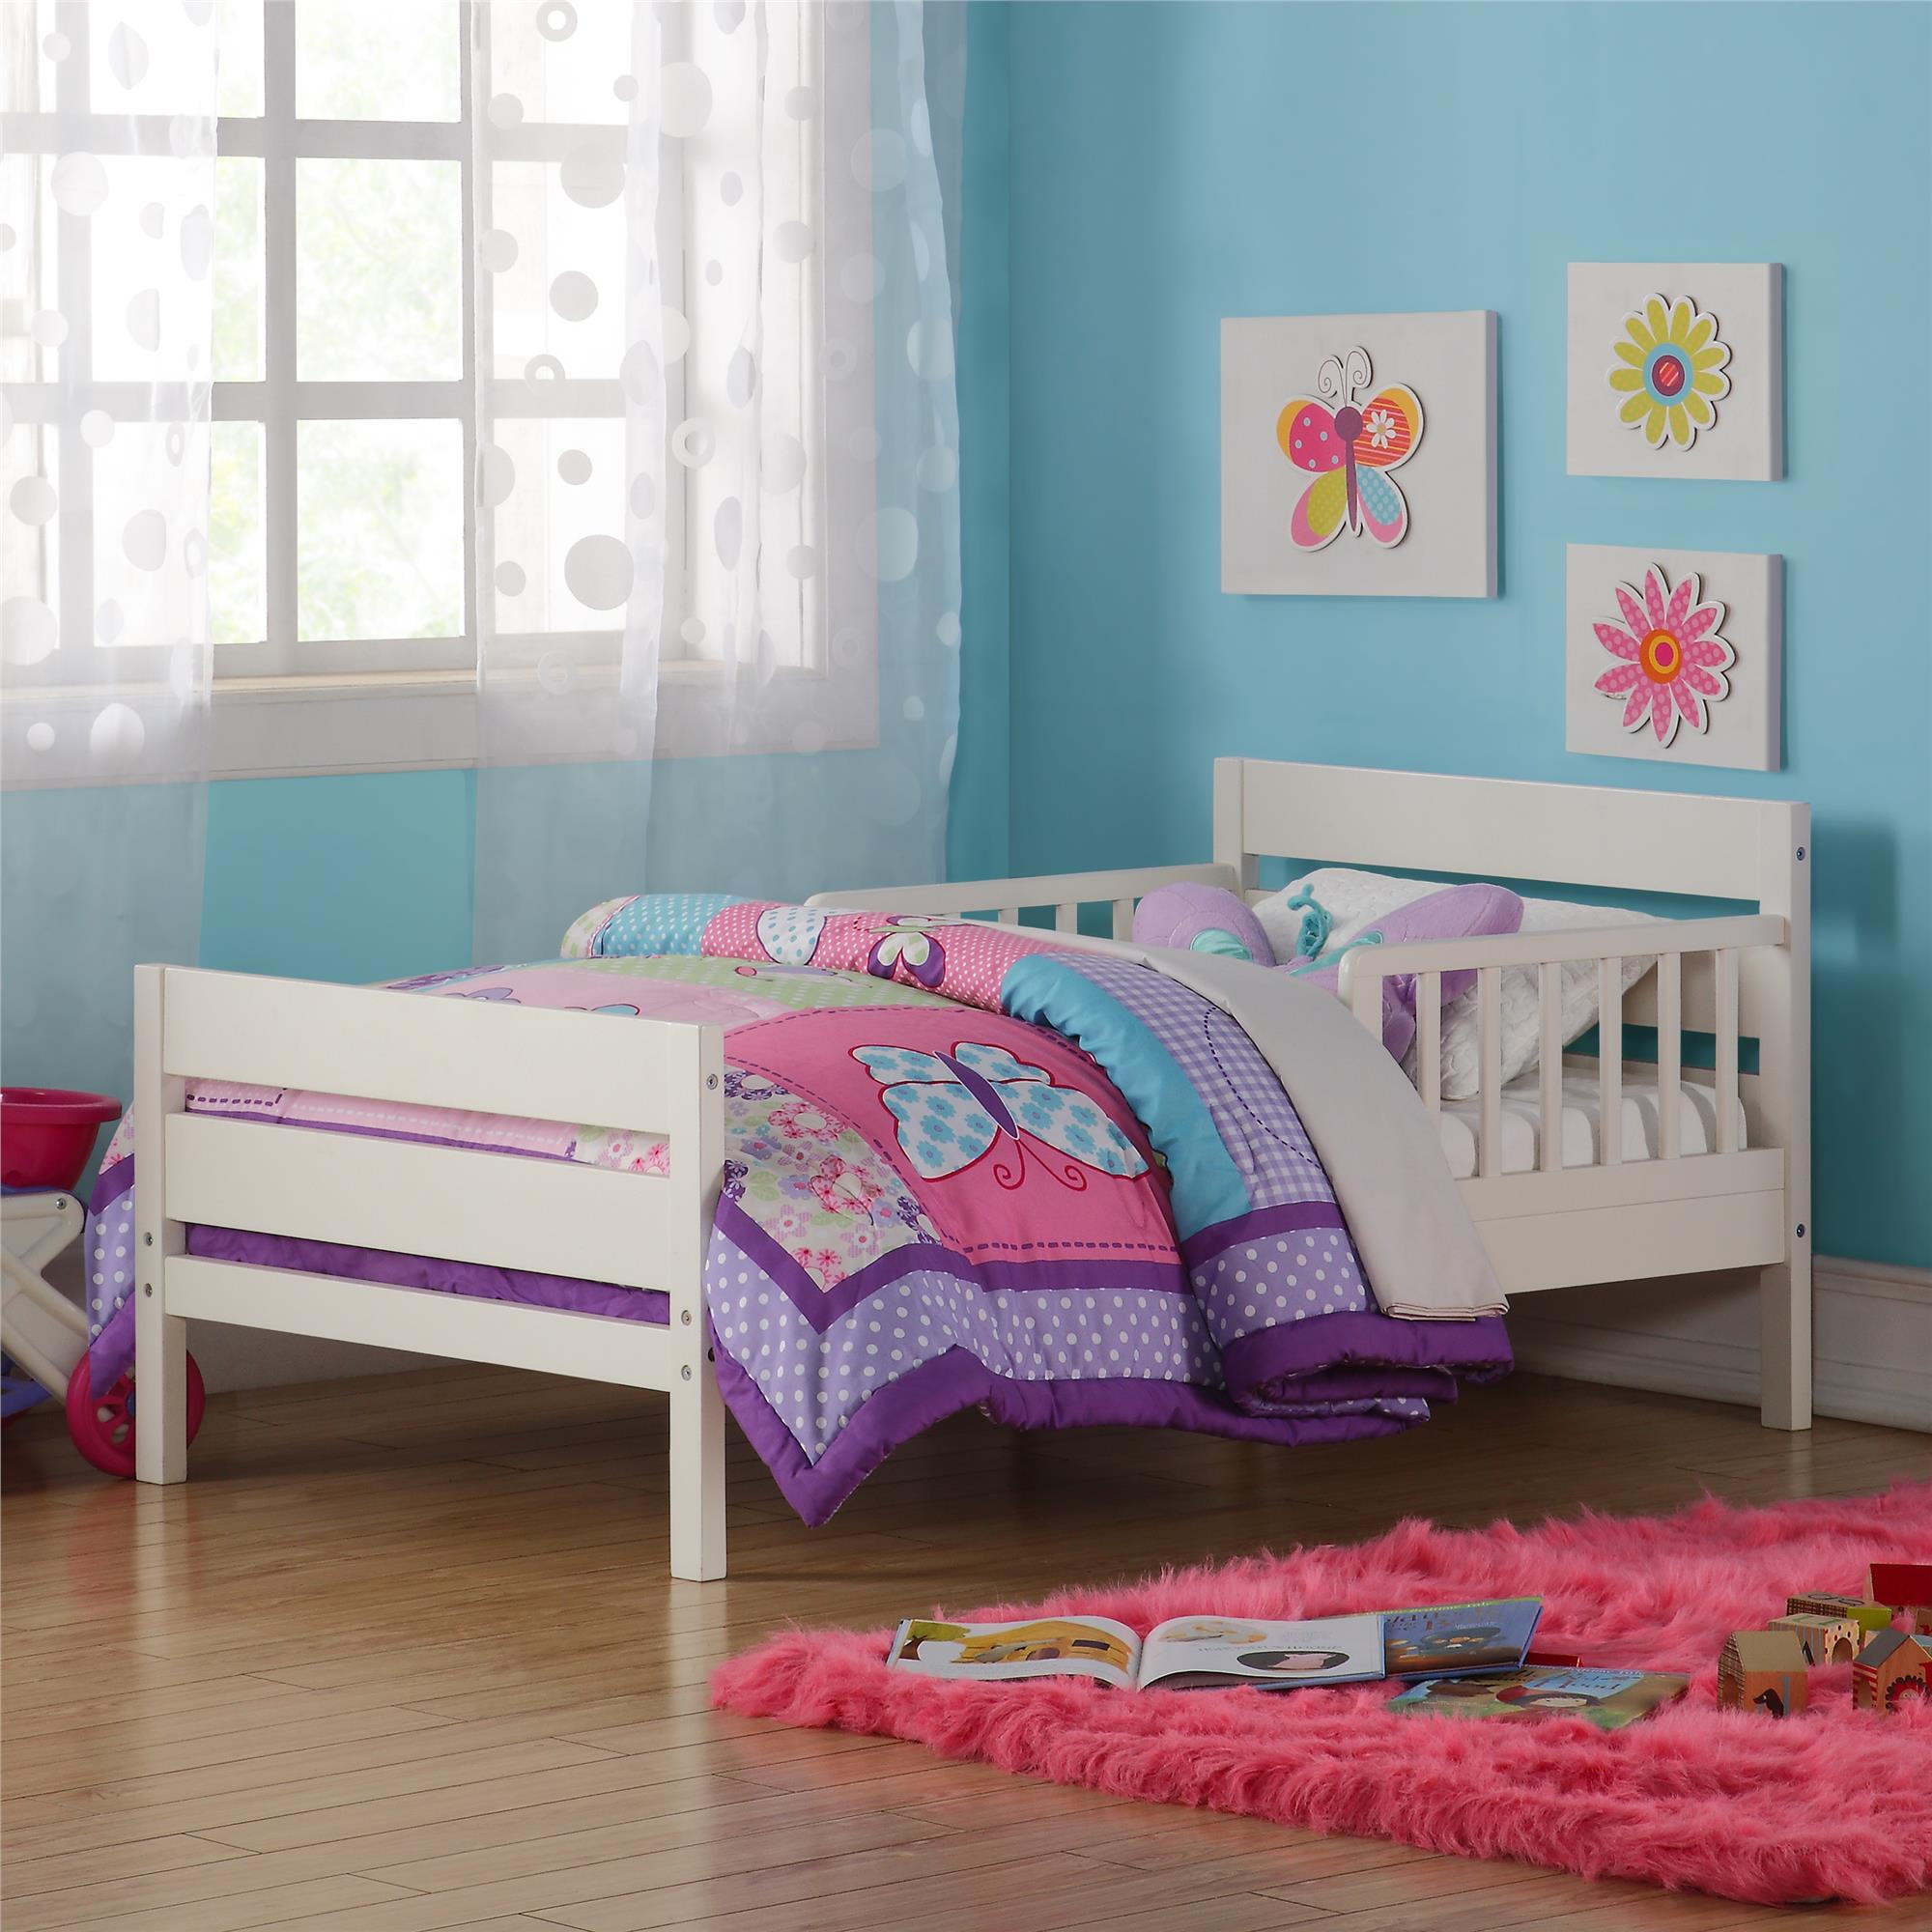 Baby Relax Cruz Toddler Bed Multiple, Twin Or Full Bed For 4 Year Old